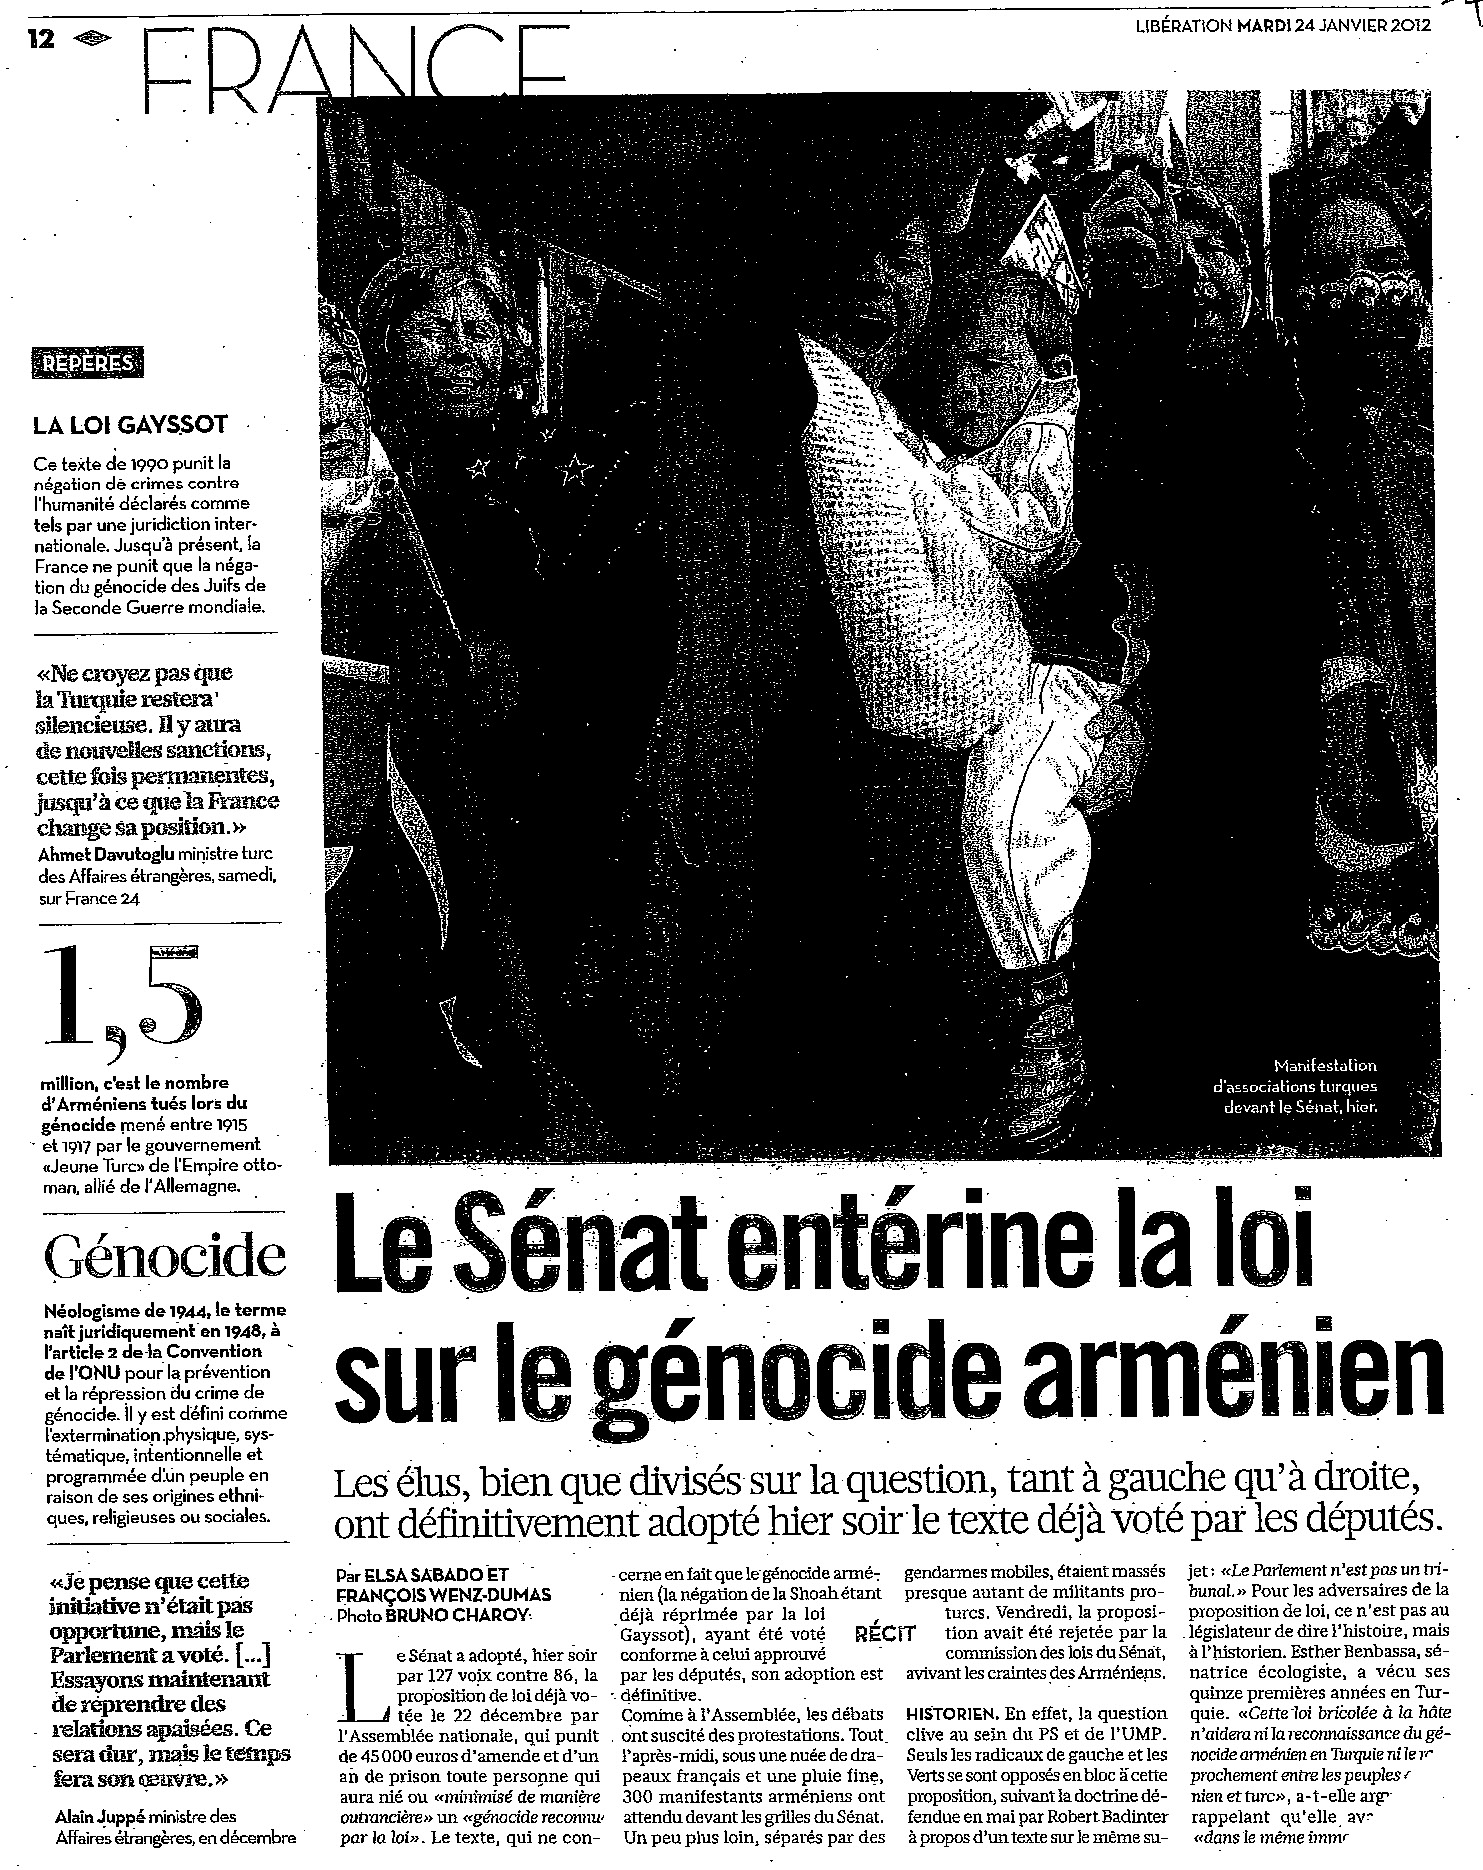 120124_Libe_genocide